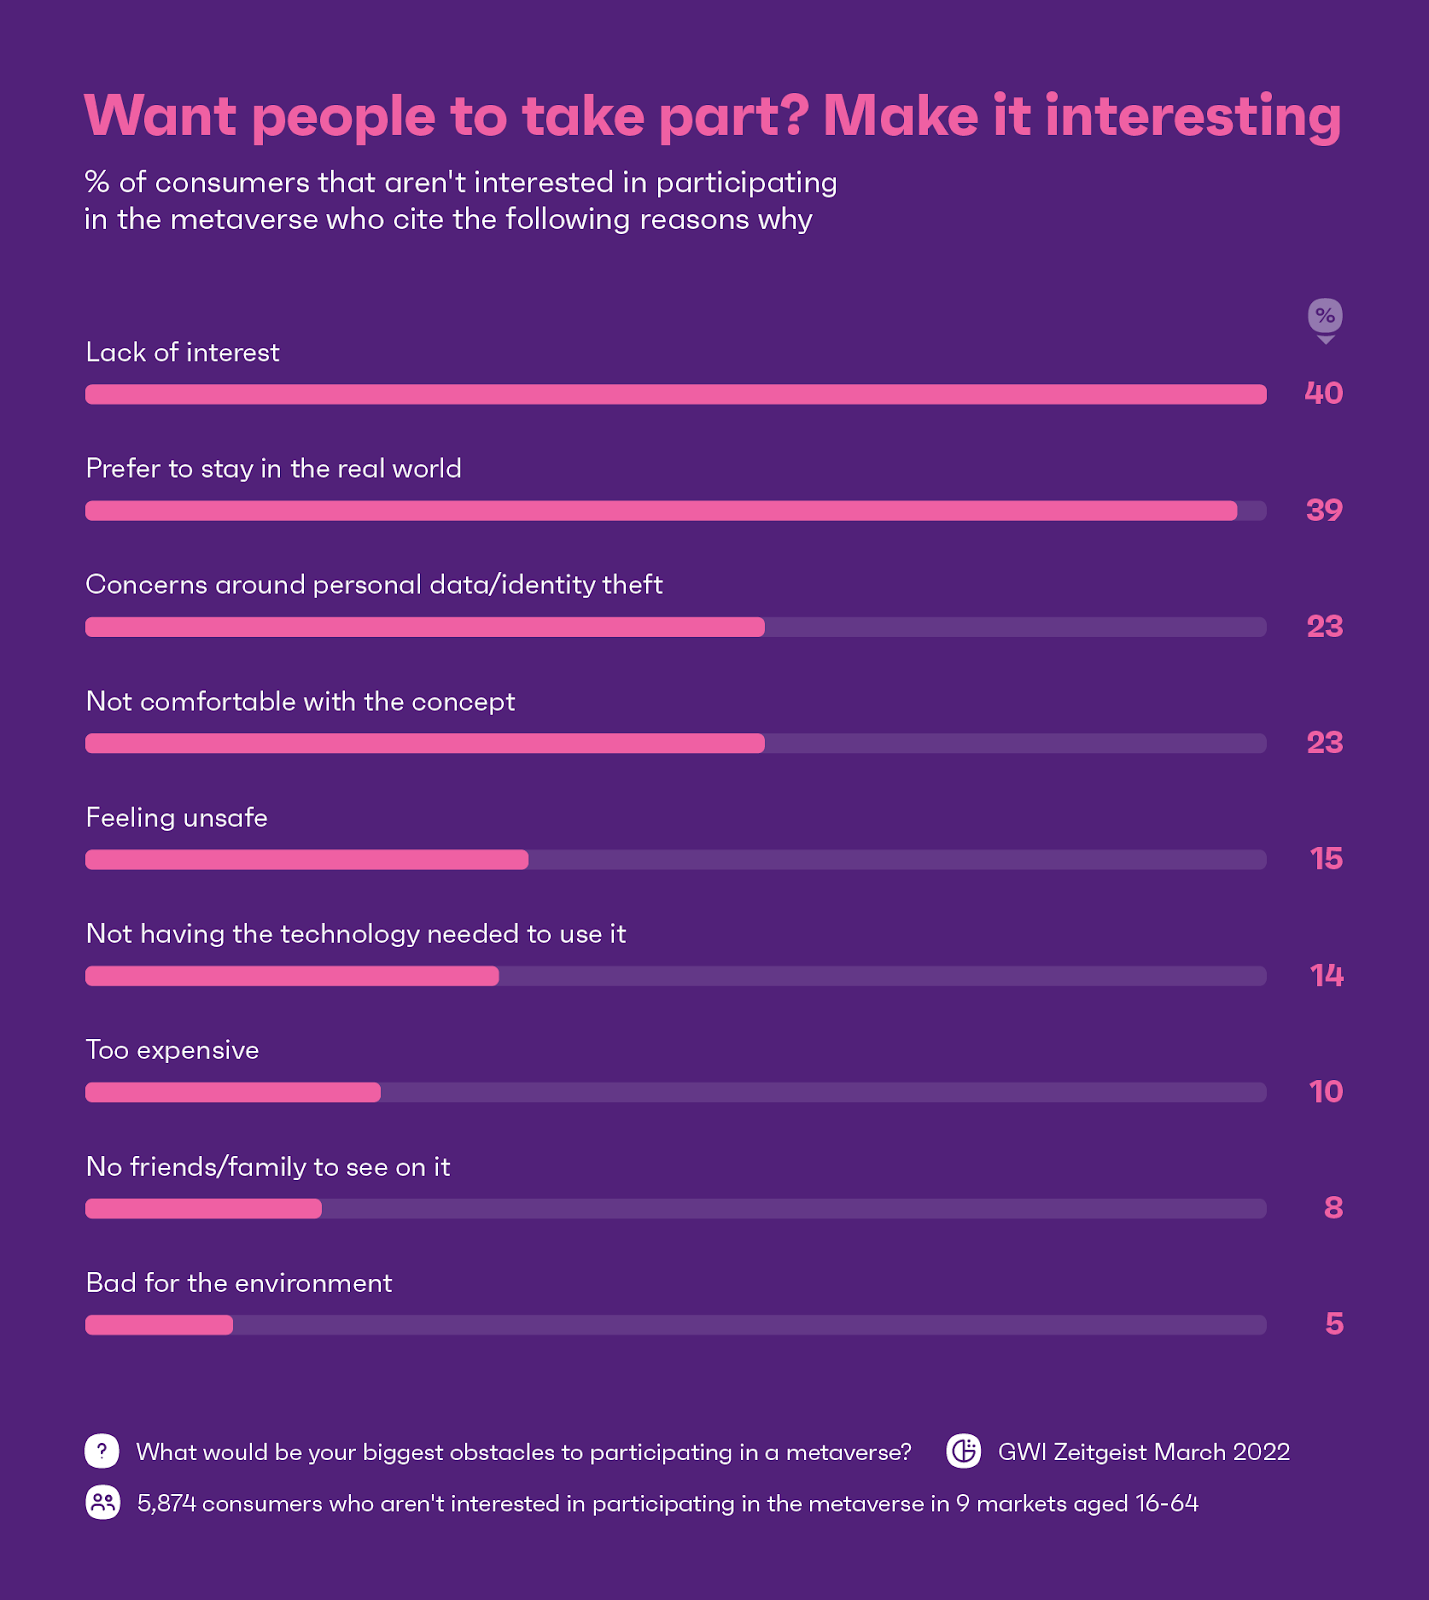 Chart showing reasons why some consumers aren't interested in the metaverse